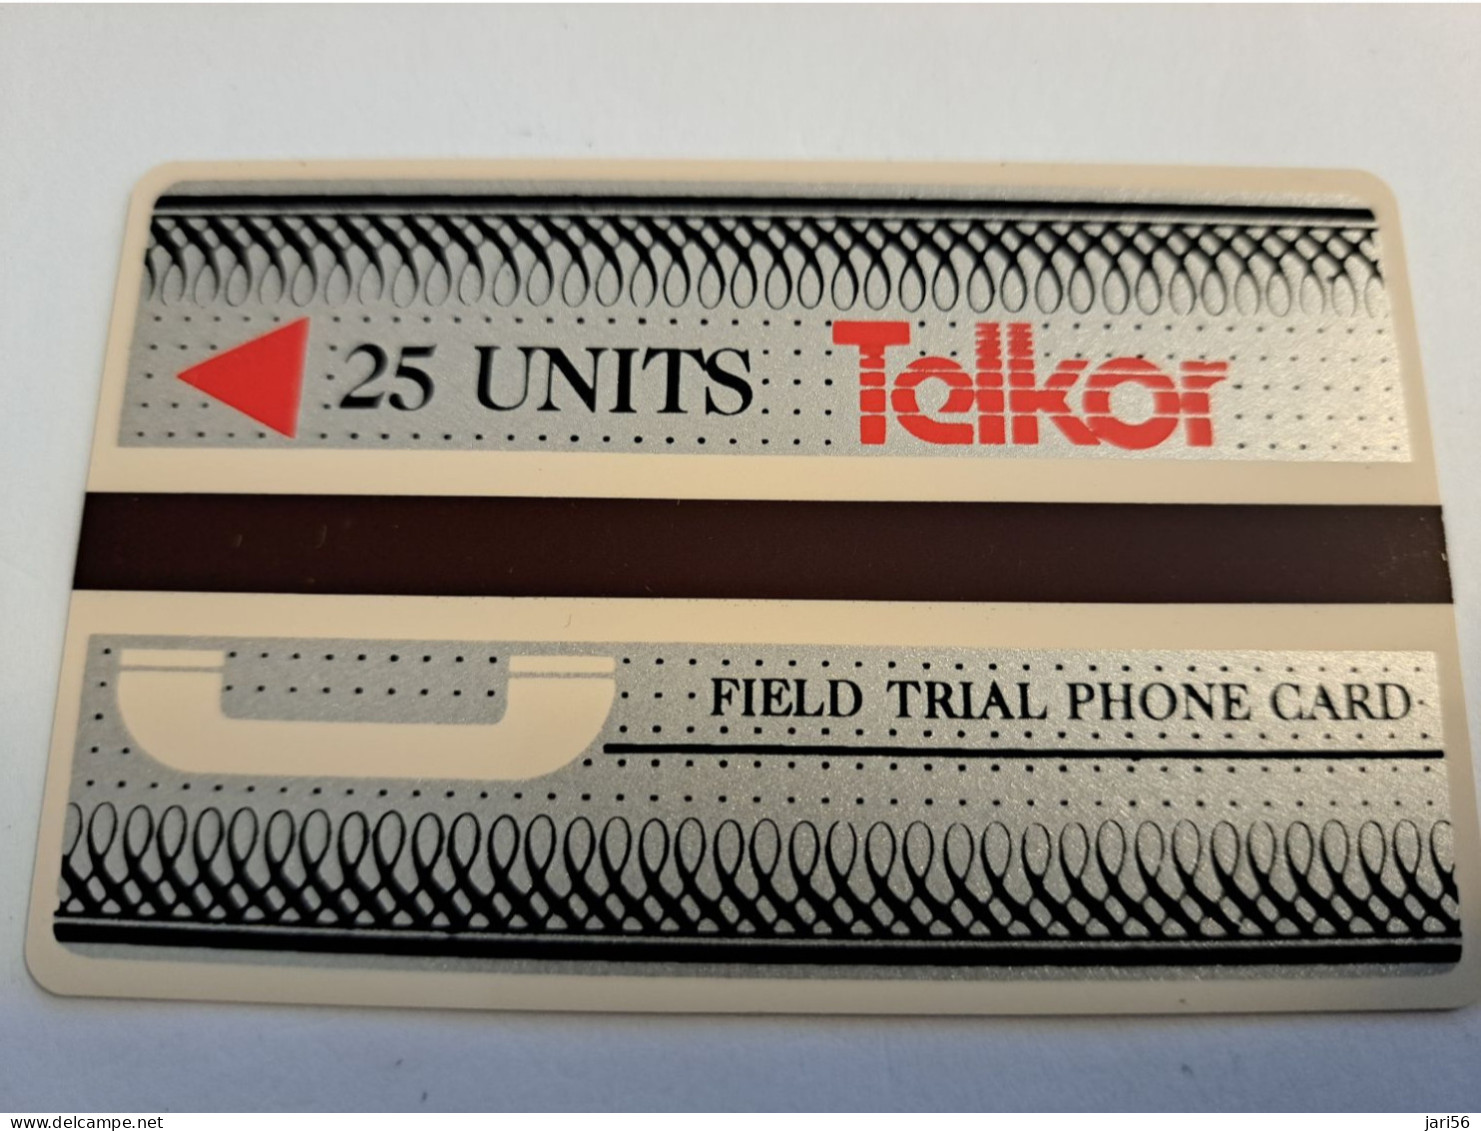 SOUTH AFRIKA  FIELD TRIAL CARD 25 UNITS TELKOR Red Arrow     1CARD Used **16048** - Afrique Du Sud